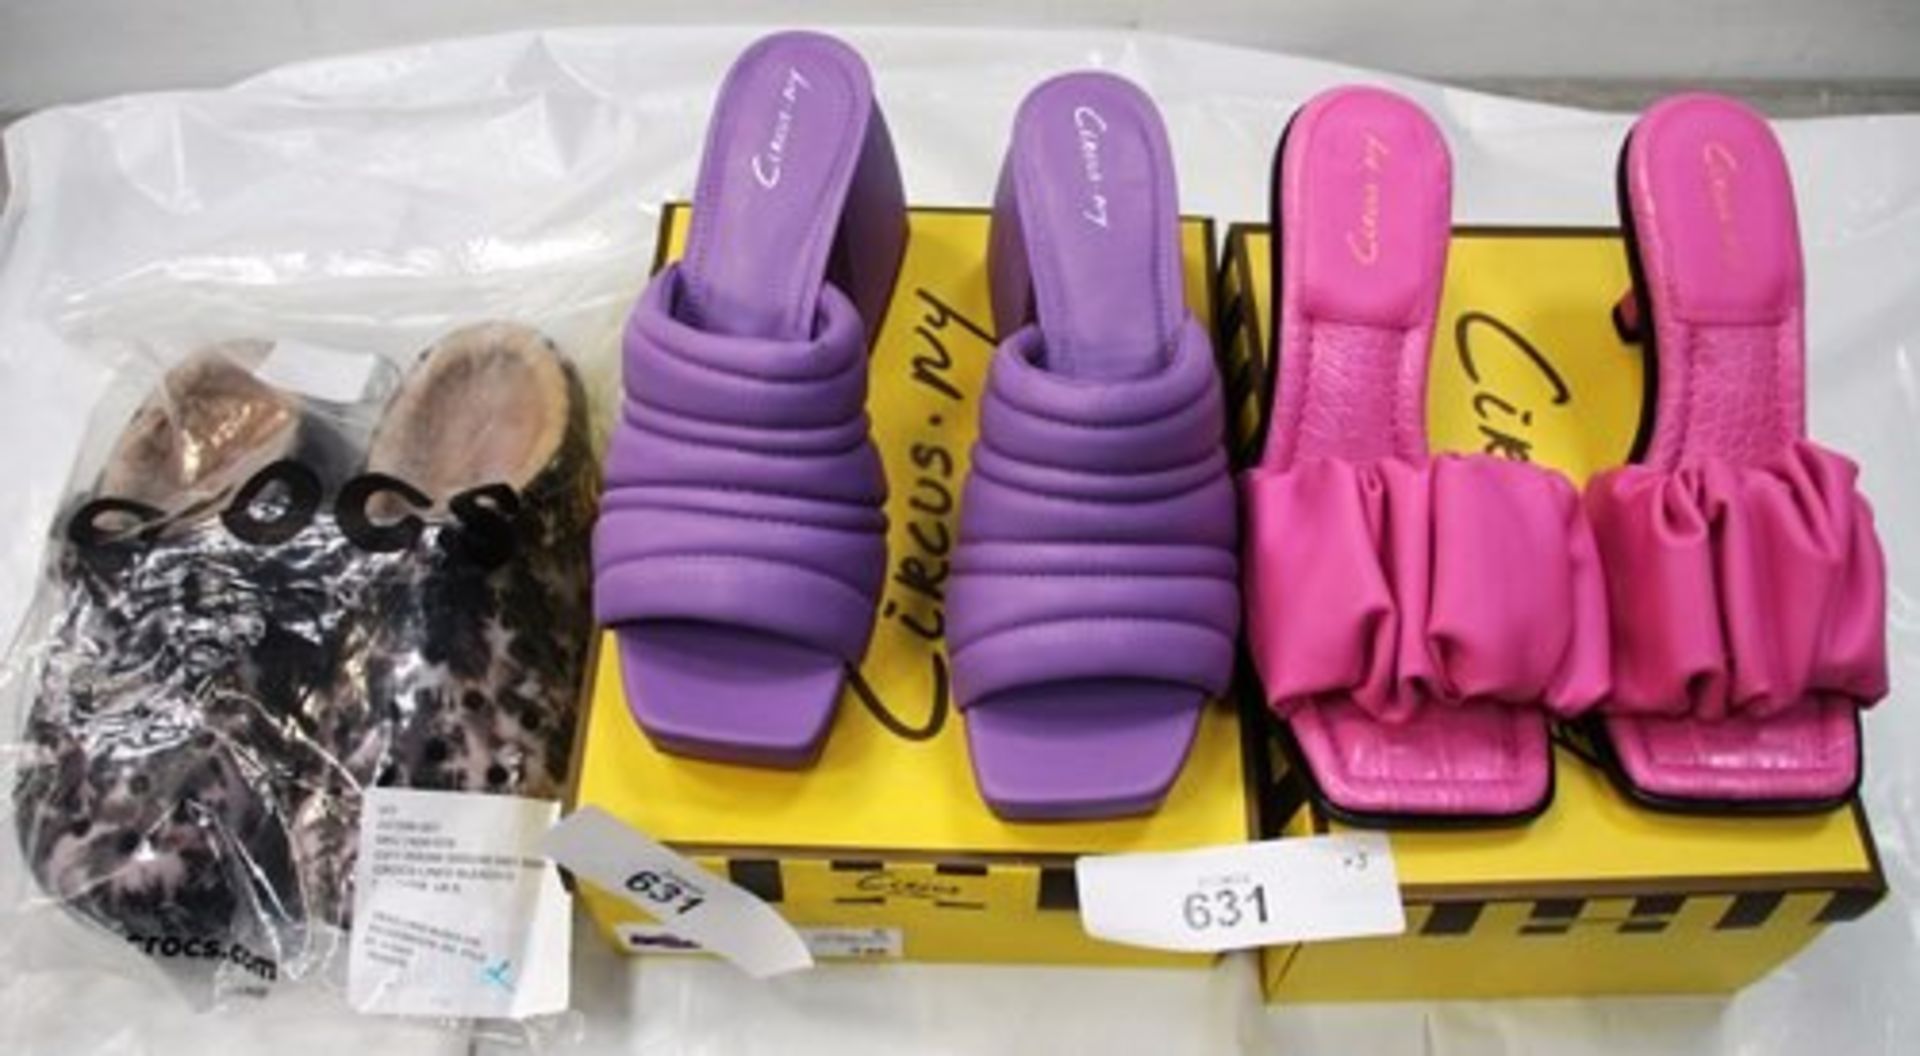 2 x Circus Ladies mules, 1 x slade pink size 6 and 1 x Marlie Lilac size UK 6 together with 1 x